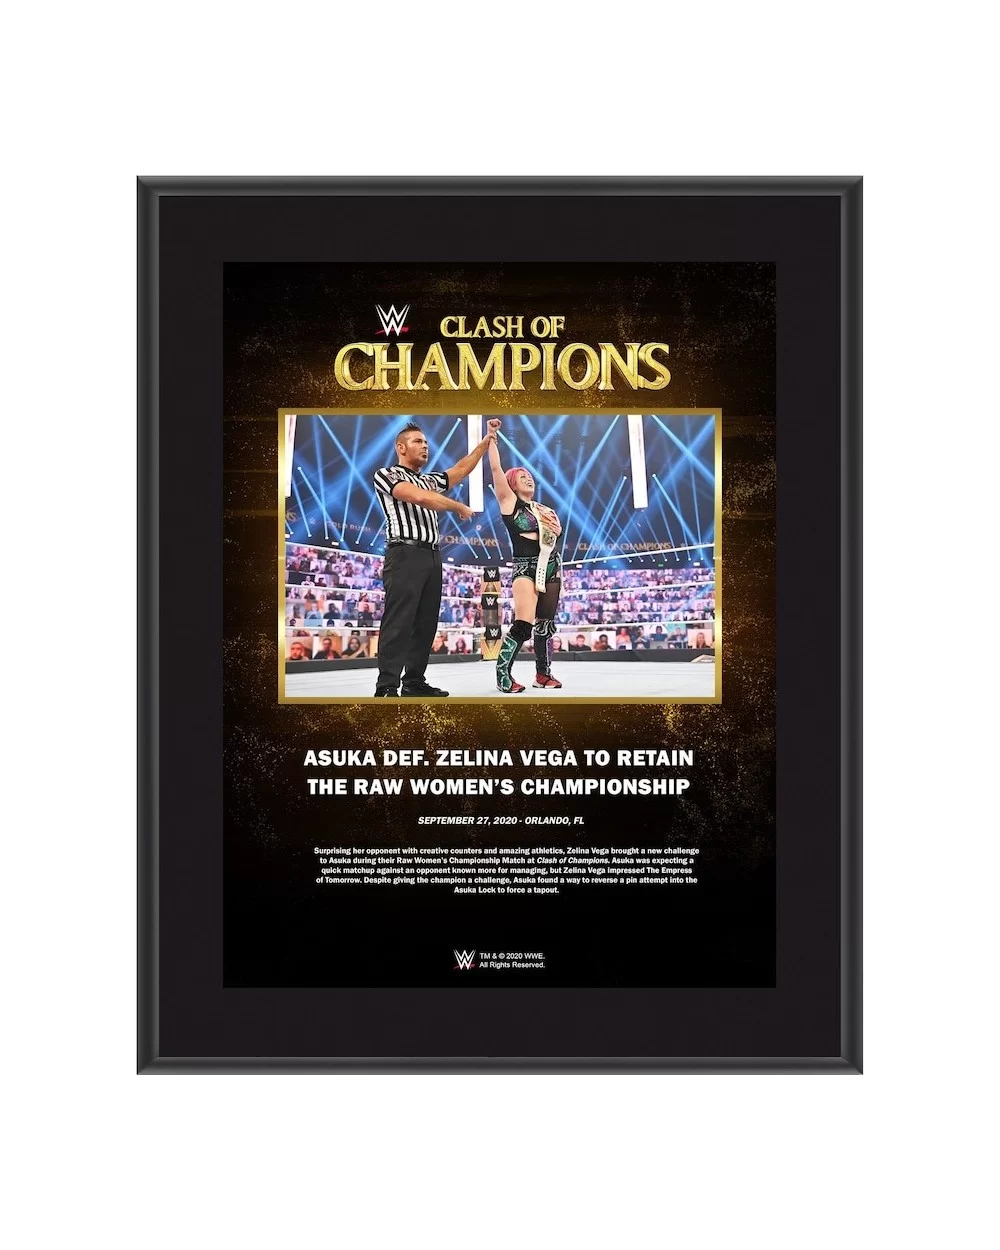 Asuka Framed 10.5" x 13" 2020 Clash of Champions Sublimated Plaque $11.76 Home & Office